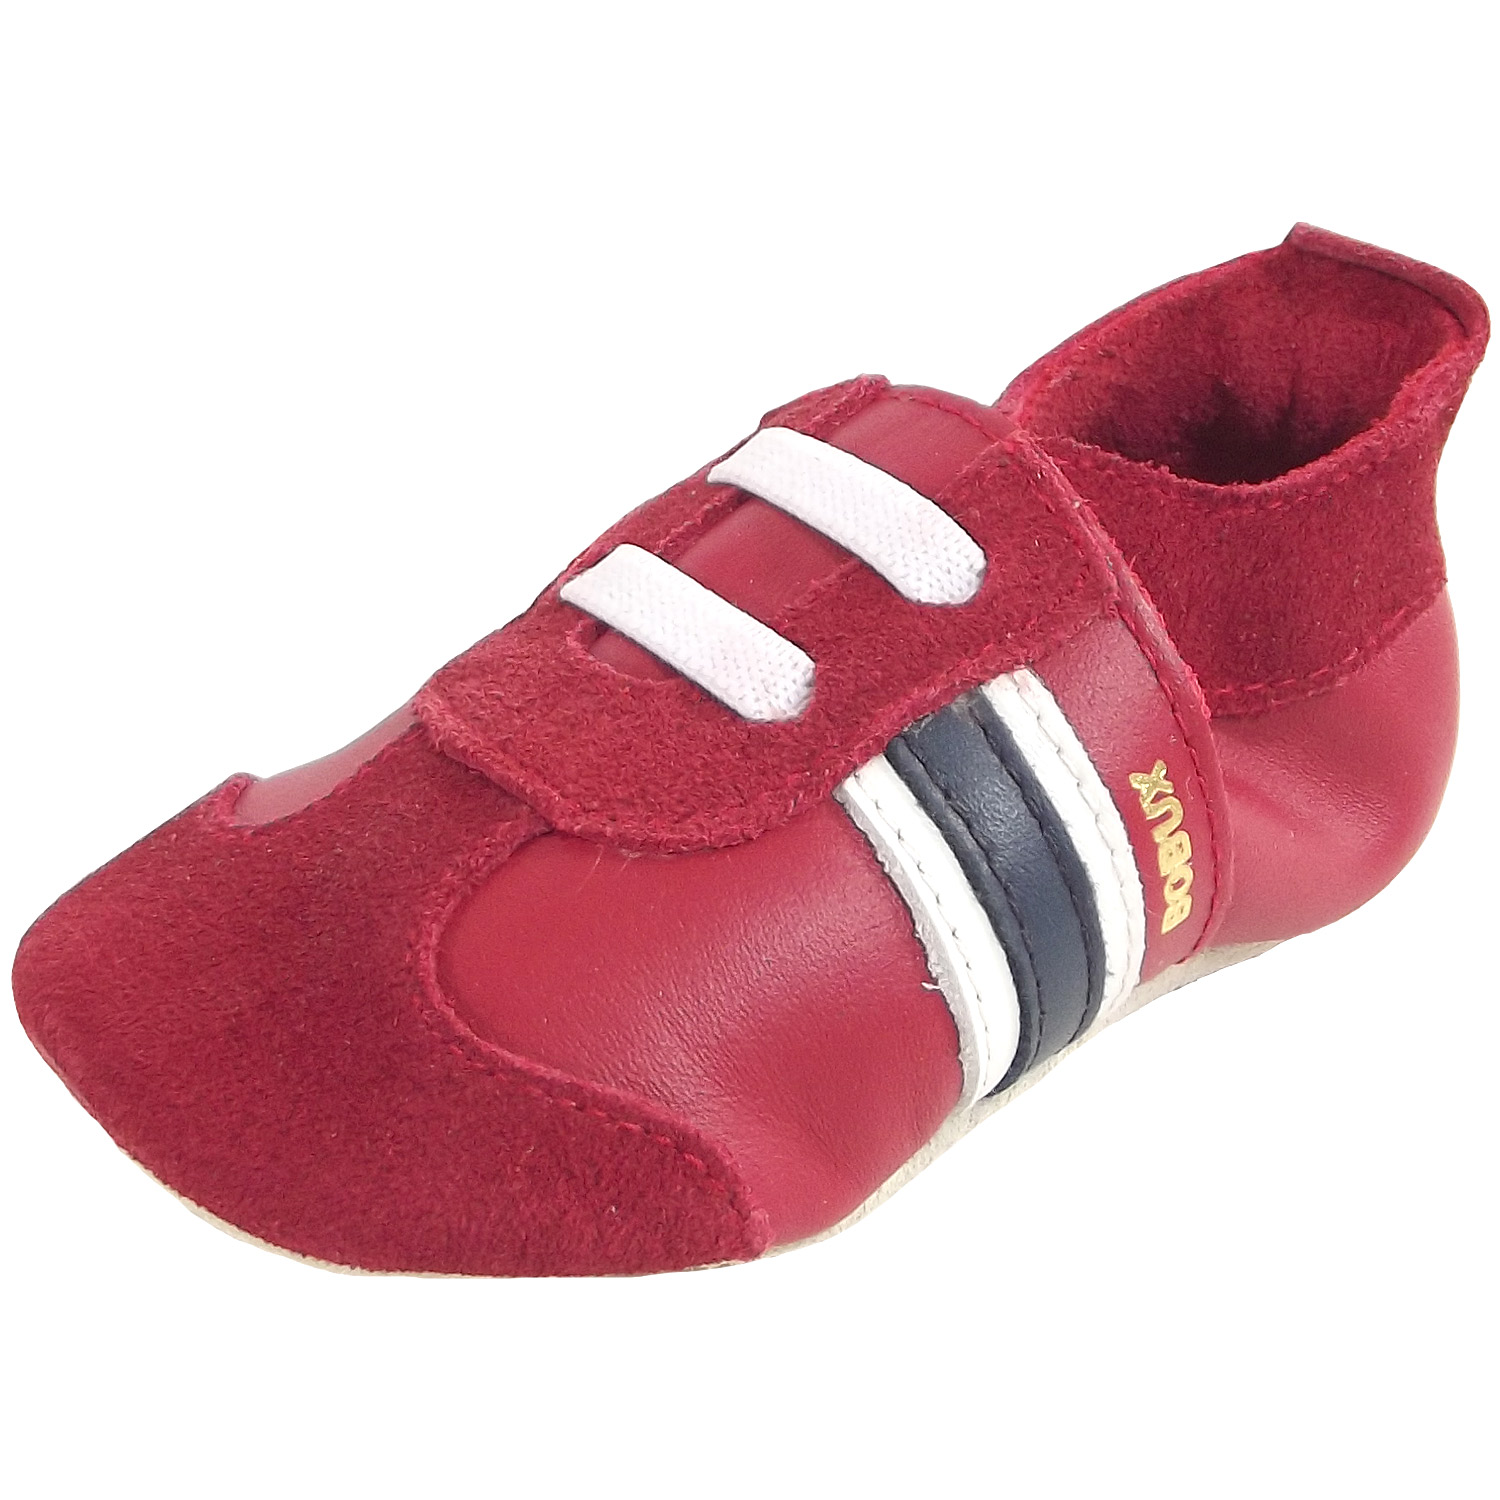 Bobux Sport Classic Baby Crawling Shoes red | Baby - Crawling Shoes ...